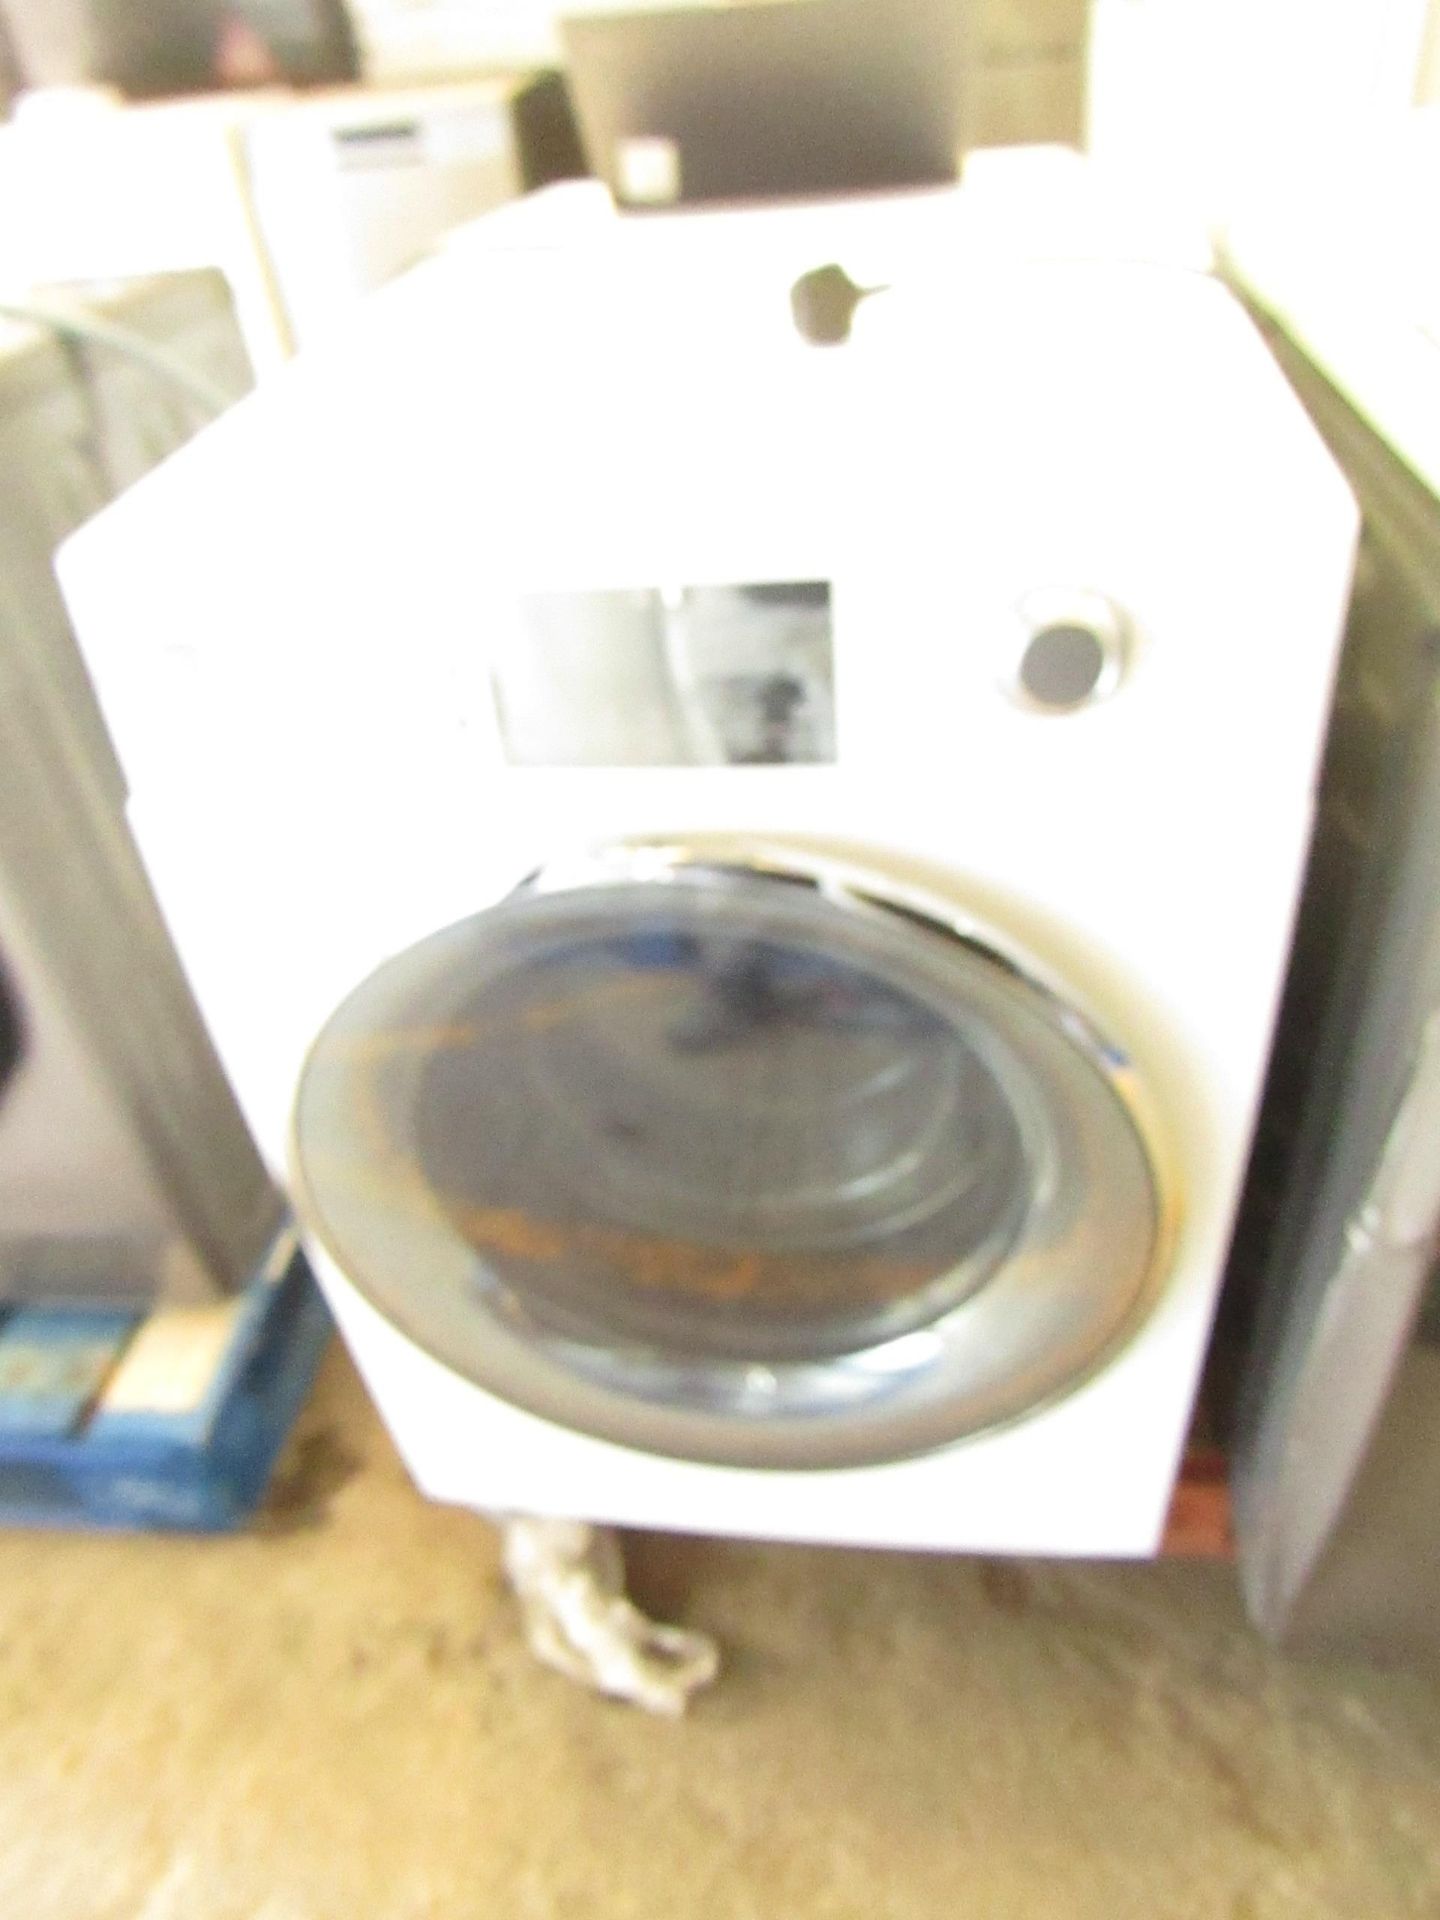 Haier HW120-B14876 washing machine, powers on and spins but the soap drawer front has comes off,